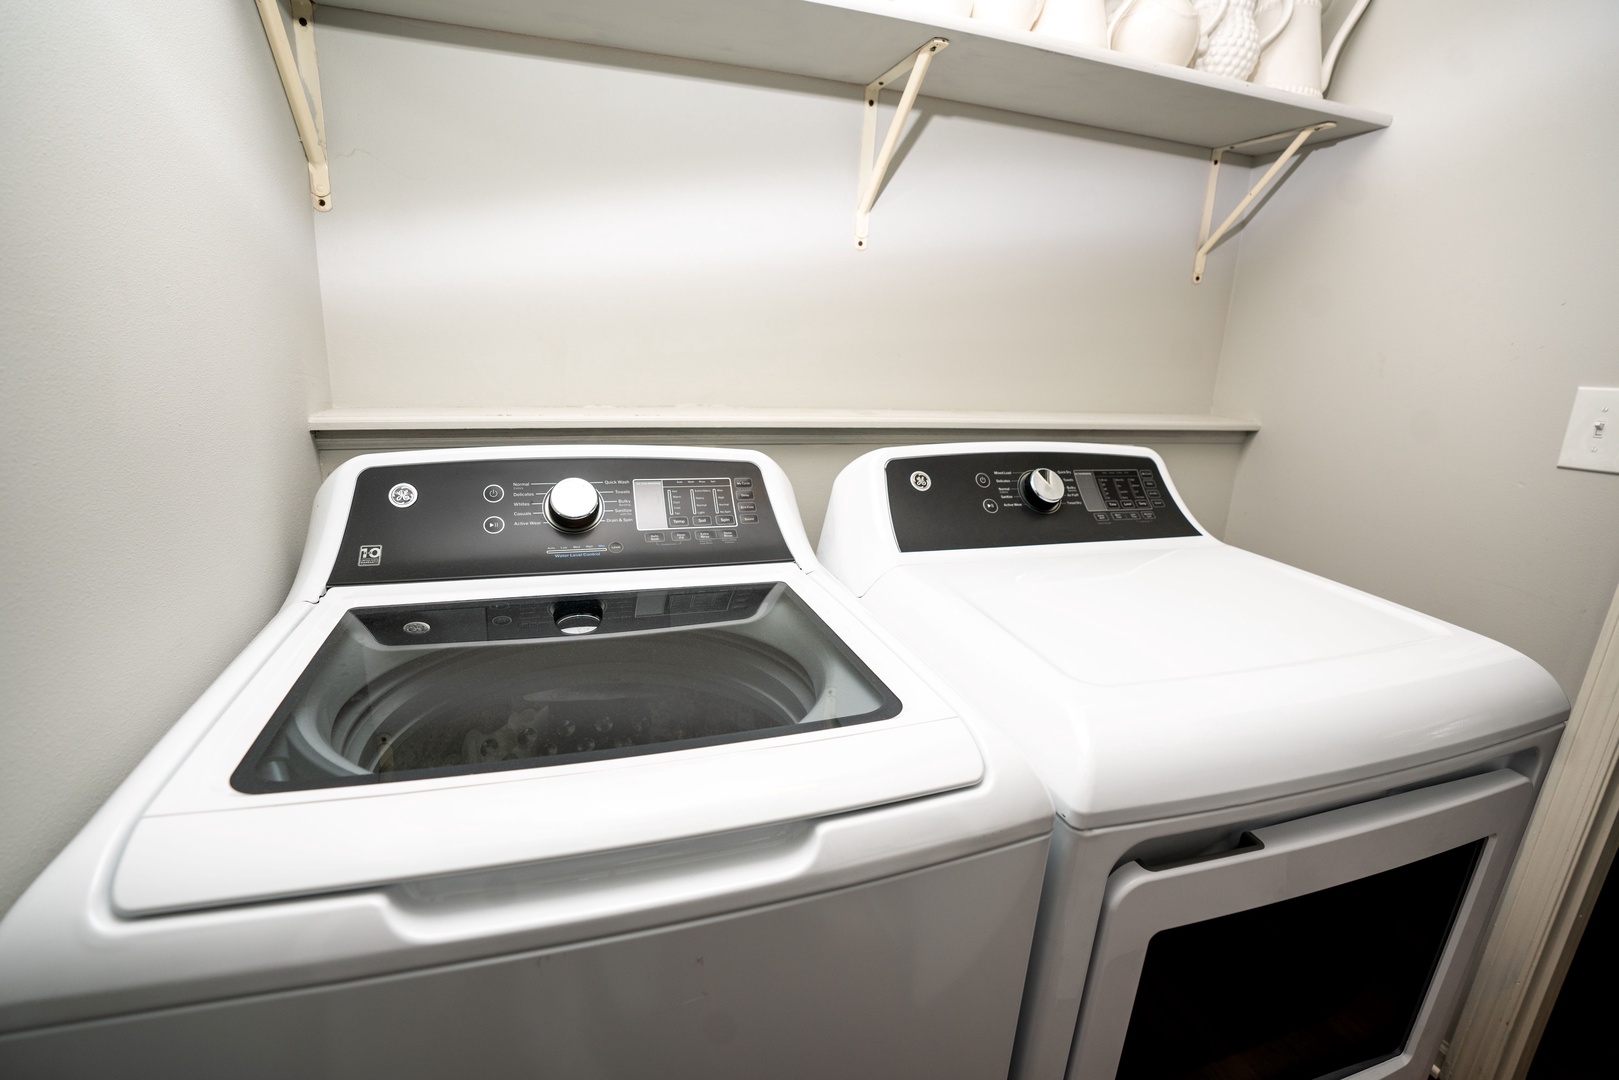 Private laundry is available for your stay, located on the main floor